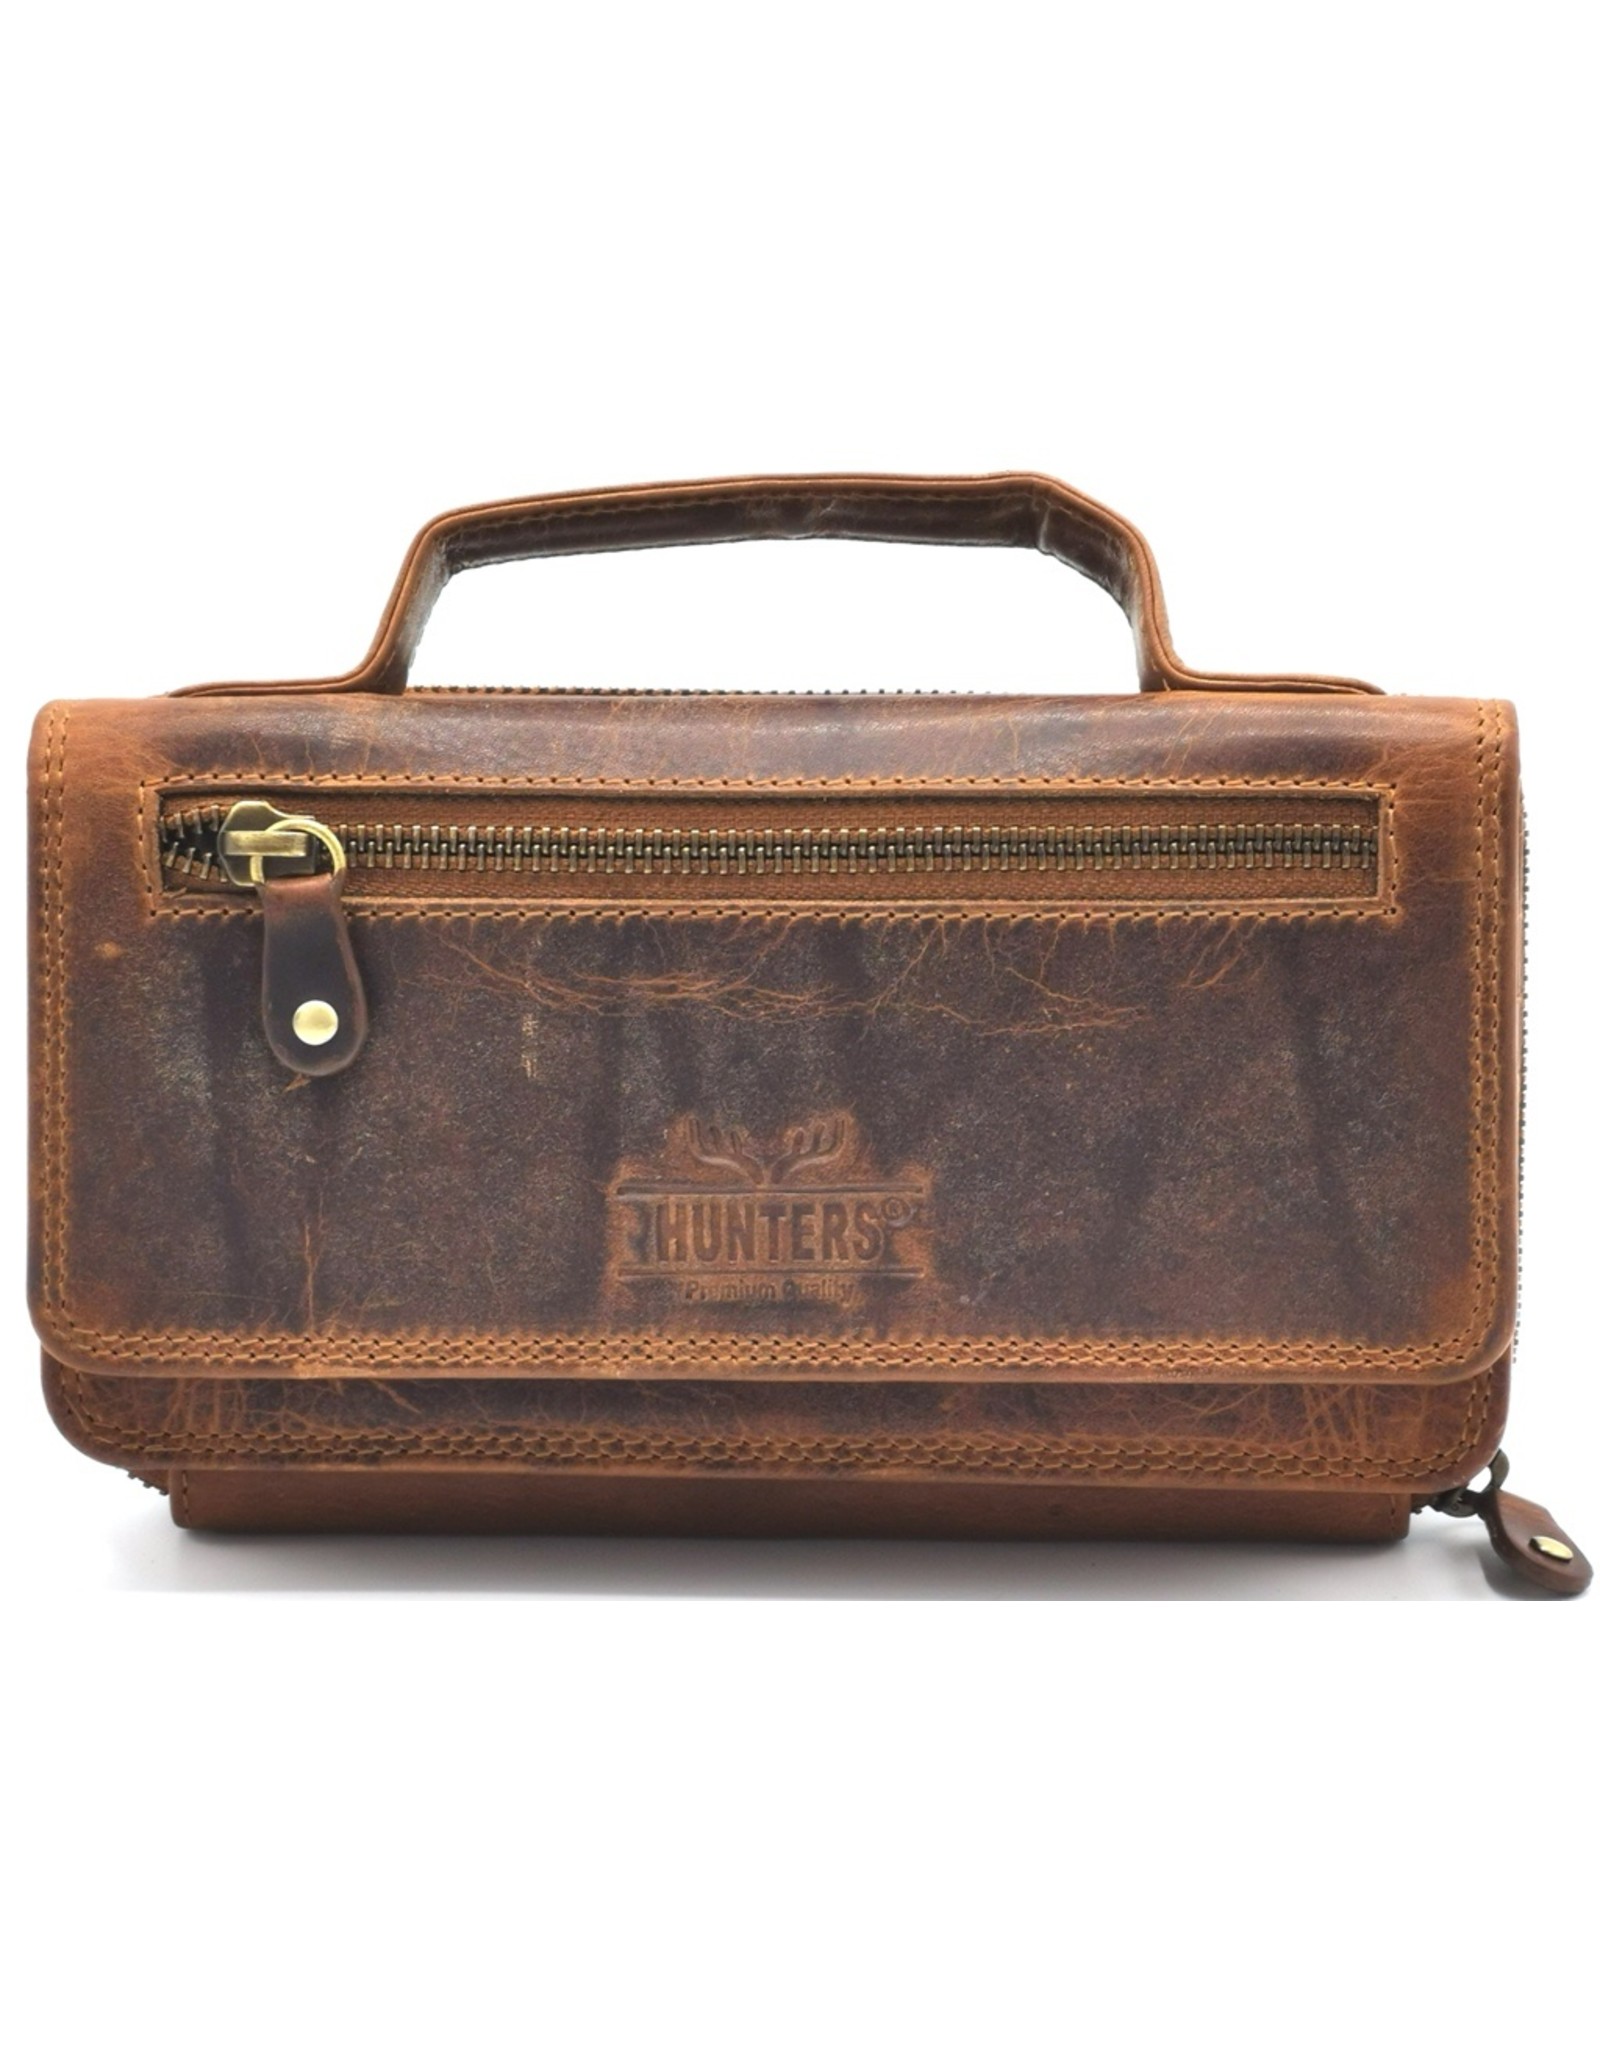 Hunters Leather Festival bags, waist bags and belt bags - Hunters Leather Organizer bag cognac